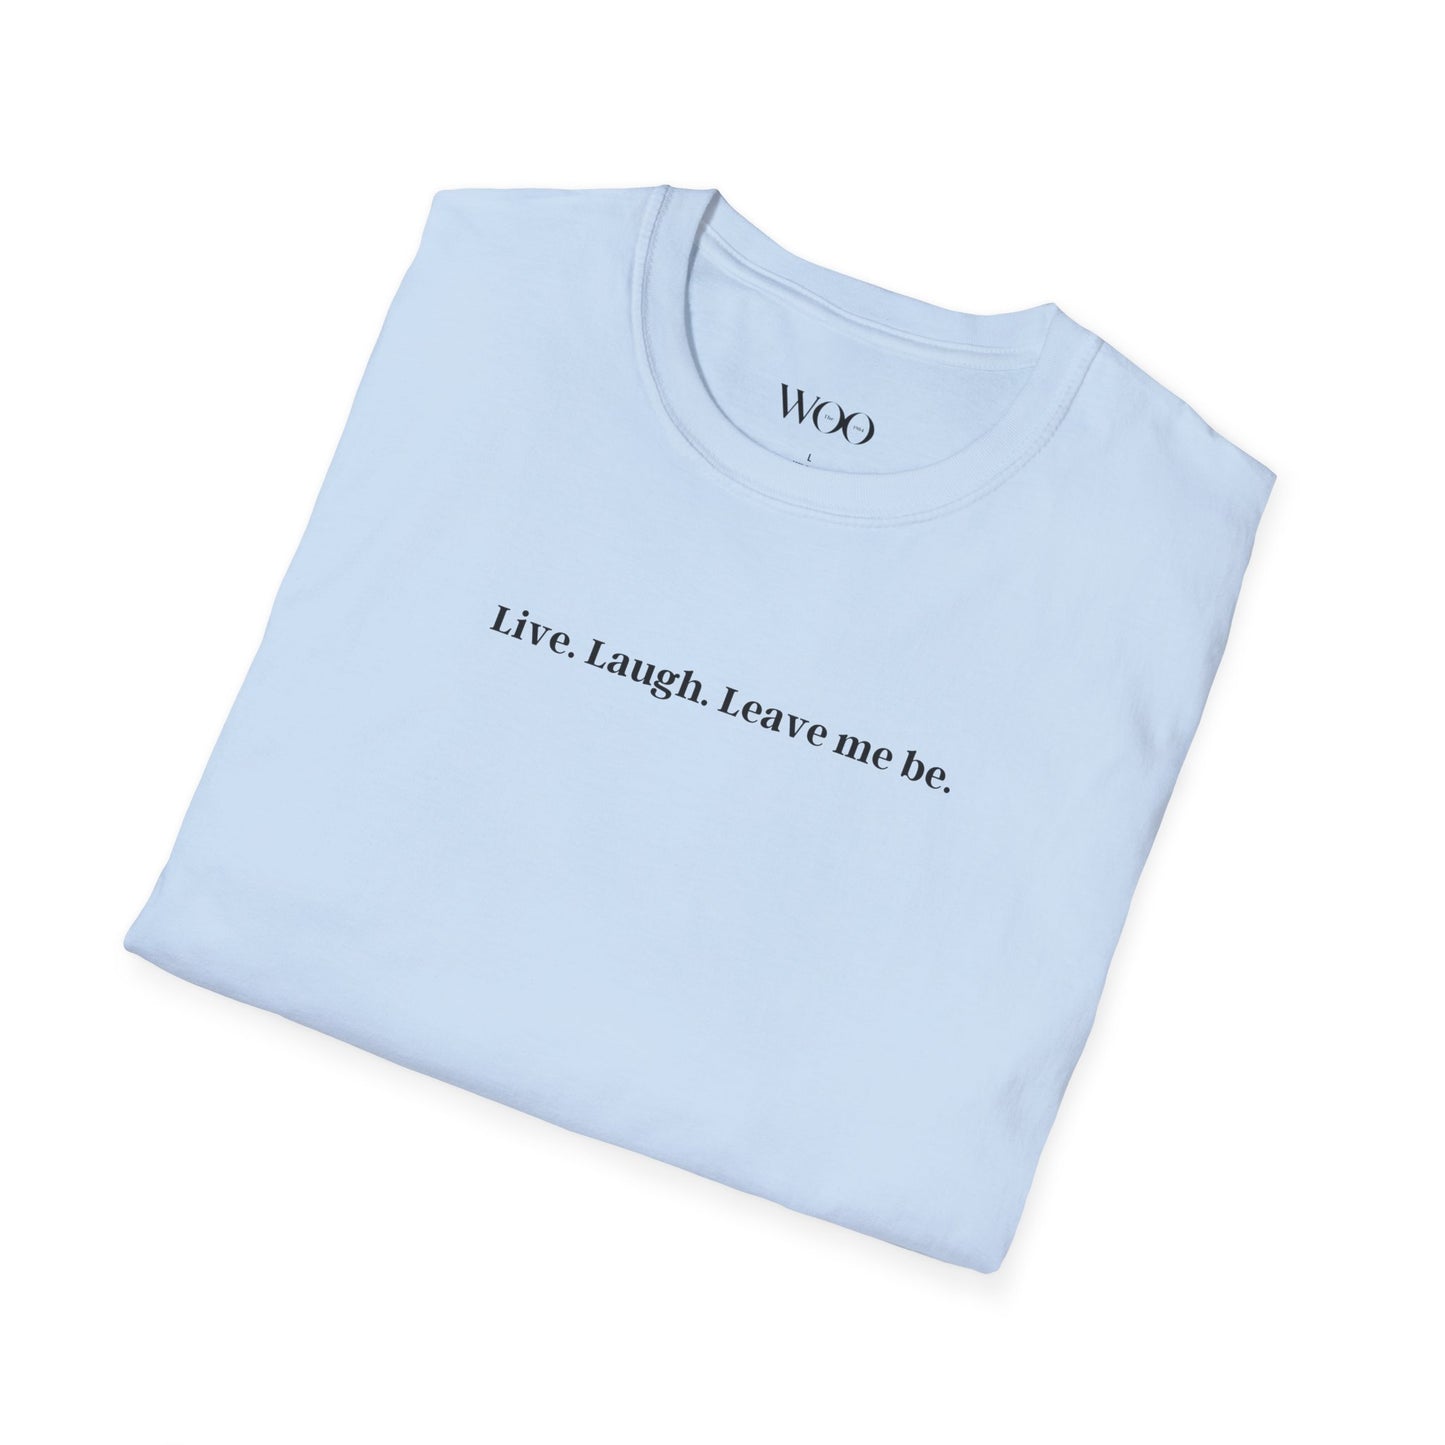 Live, Laugh, Leave me be - tee